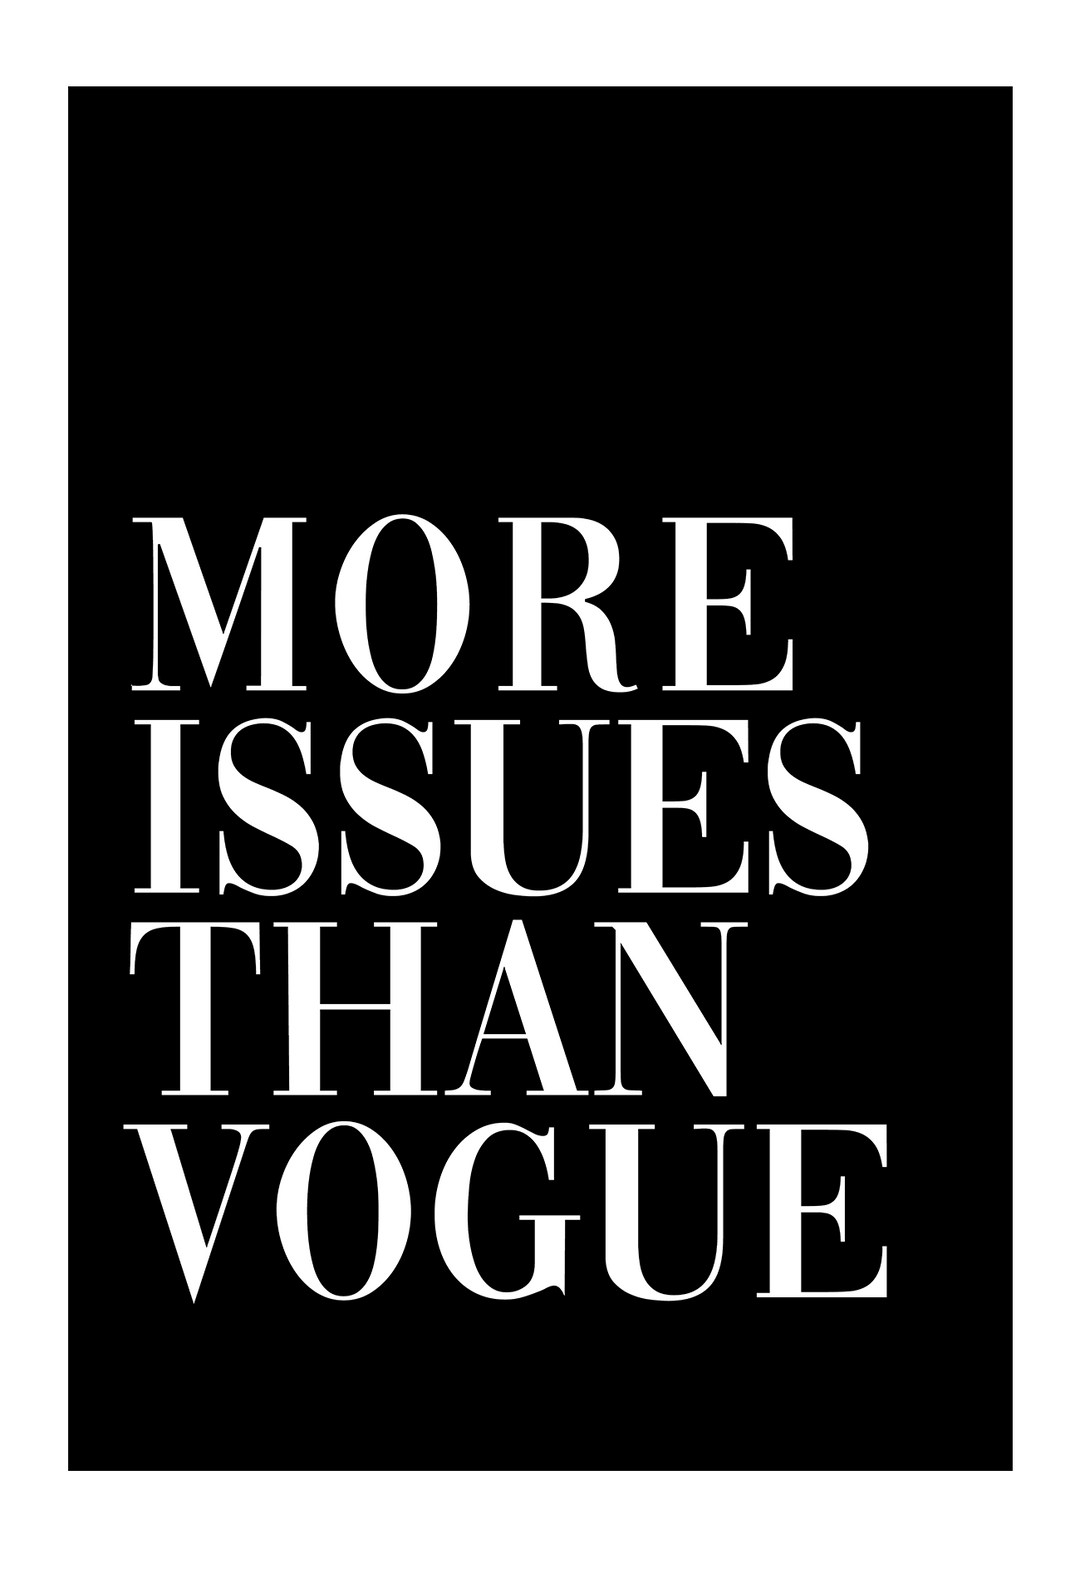 Canvas Print 70x100cm / Unframed More Issues than Vogue Black More Issues than Vogue Black Wall Art : Ready to hang framed artwork. Brand